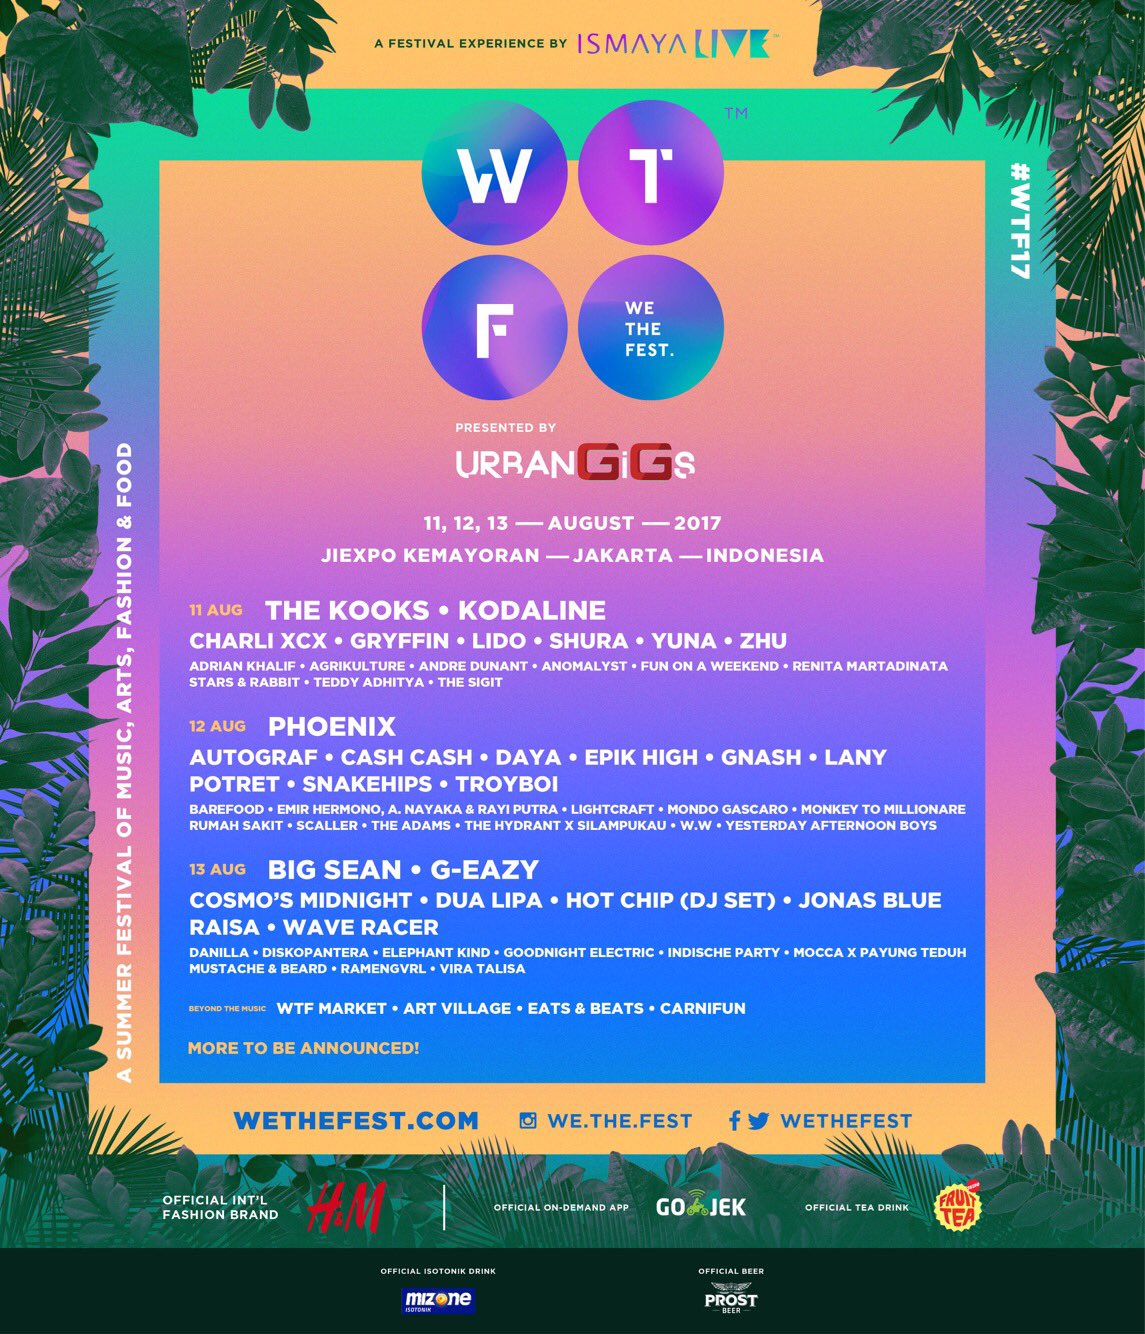 We The Fest on Twitter "Phase 3 + Daily Lineup of WE THE FEST 2017 is